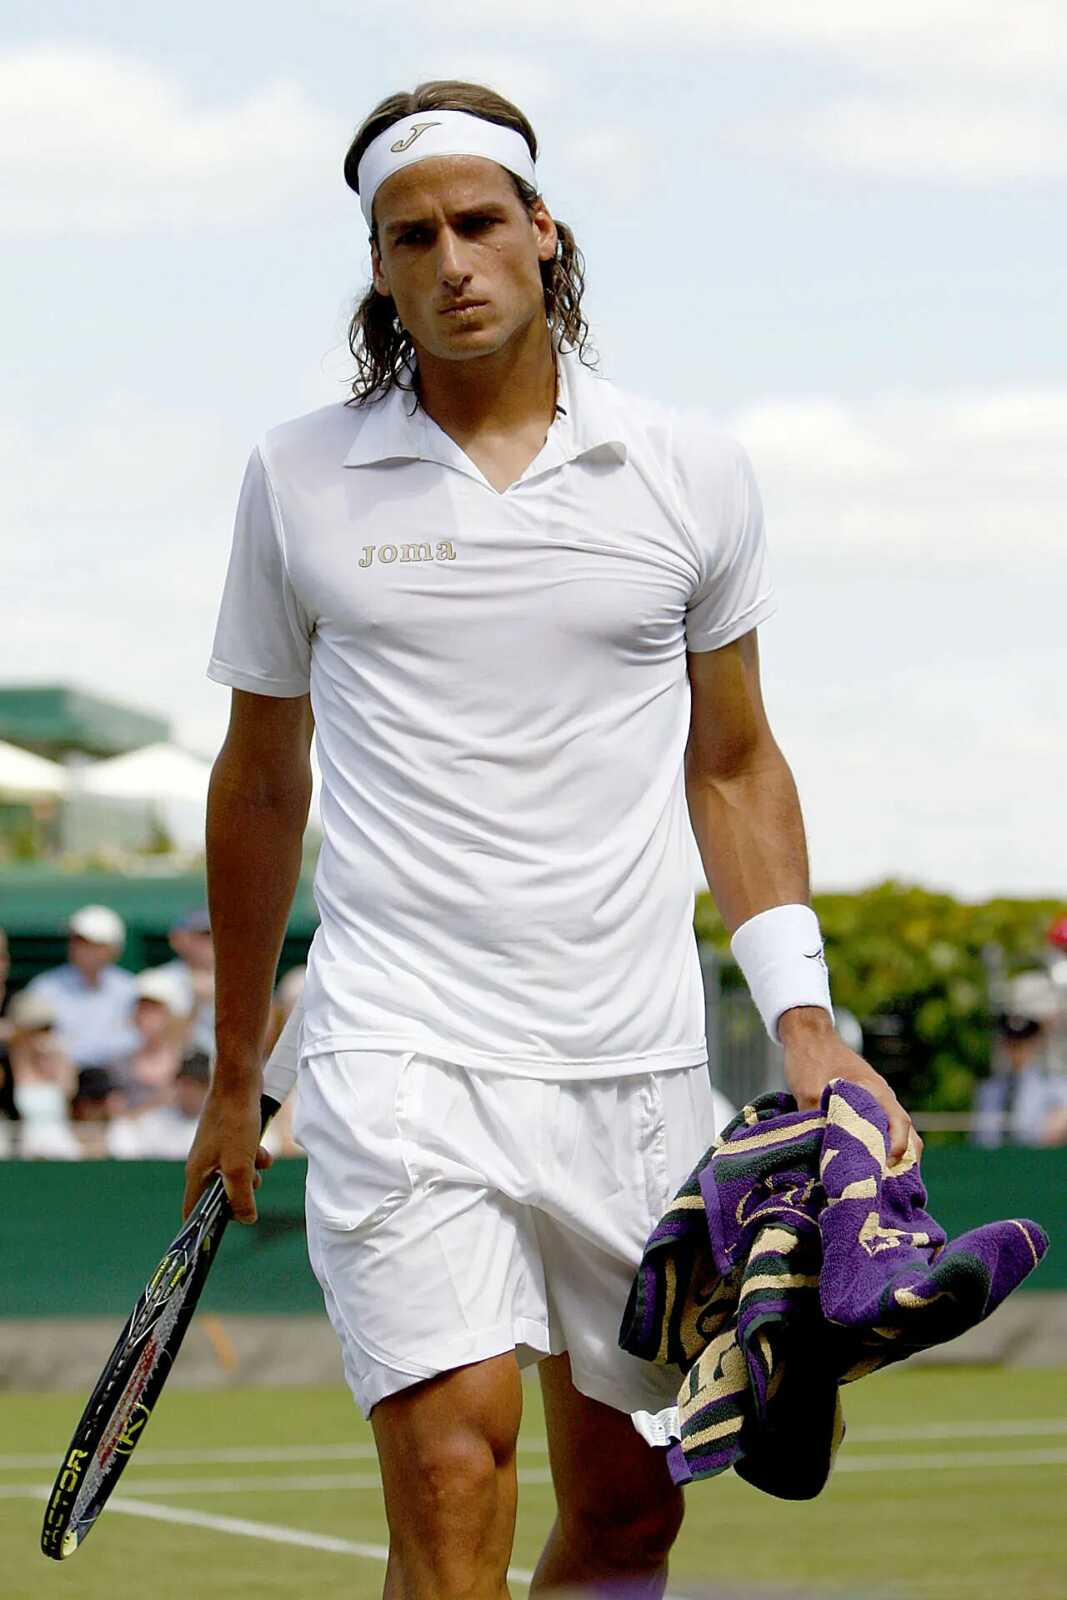 Hottest Male Tennis Players of All Time